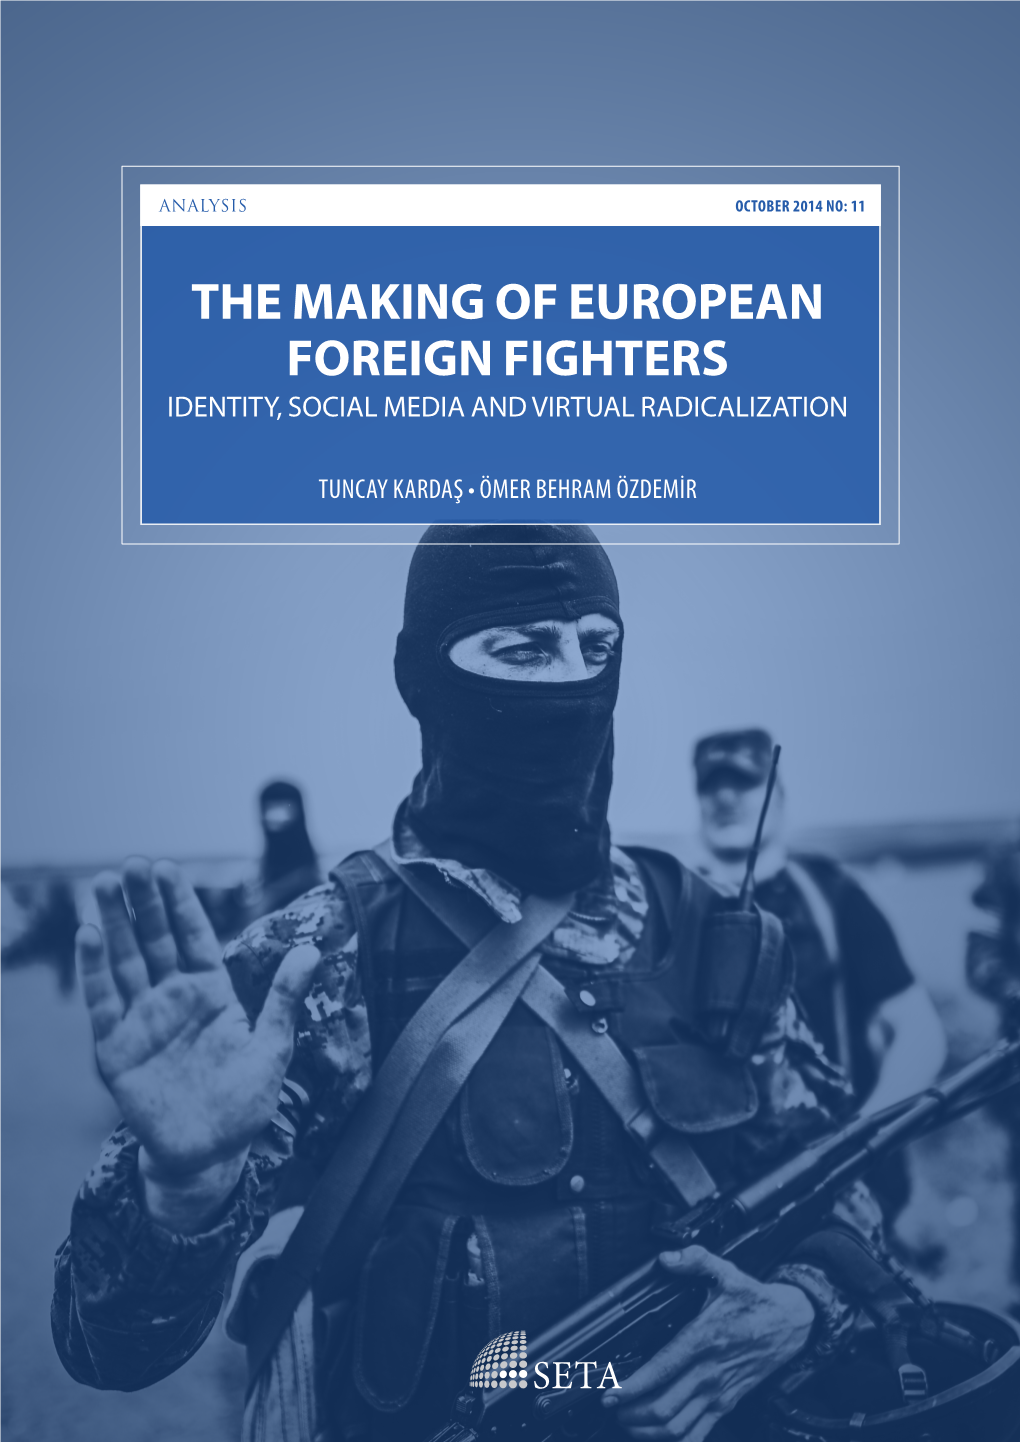 The Making of European Foreign Fighters Identity, Social Media and Virtual Radicalization